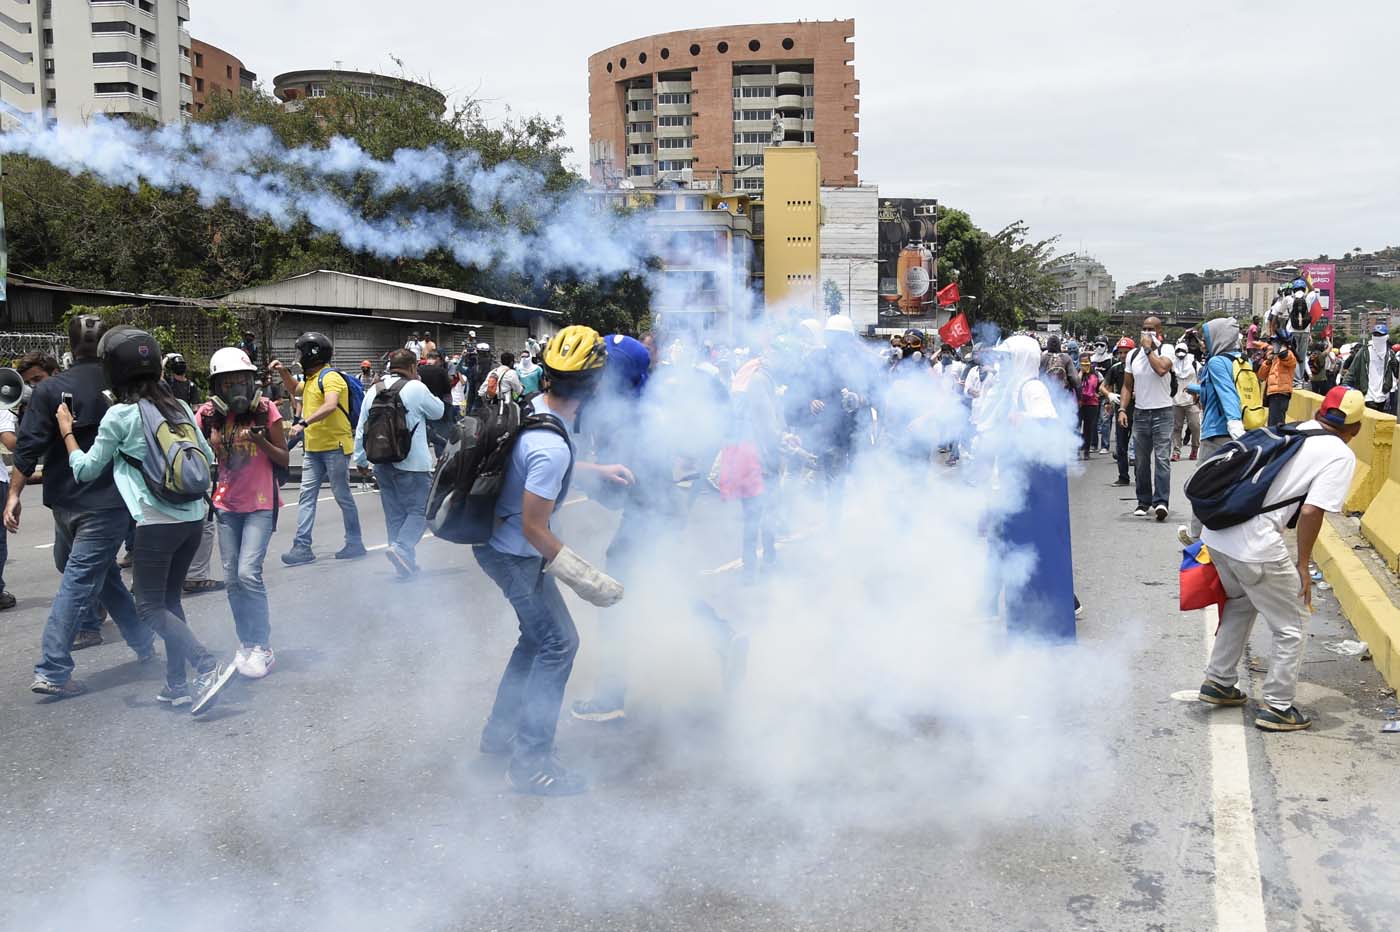 Demonstrators march amid tear gas during a protest against Venezuelan President Nicolas Maduro, in Caracas on May 3, 2017. Venezuela's angry opposition rallied Wednesday vowing huge street protests against President Nicolas Maduro's plan to rewrite the constitution and accusing him of dodging elections to cling to power despite deadly unrest. / AFP PHOTO / JUAN BARRETO